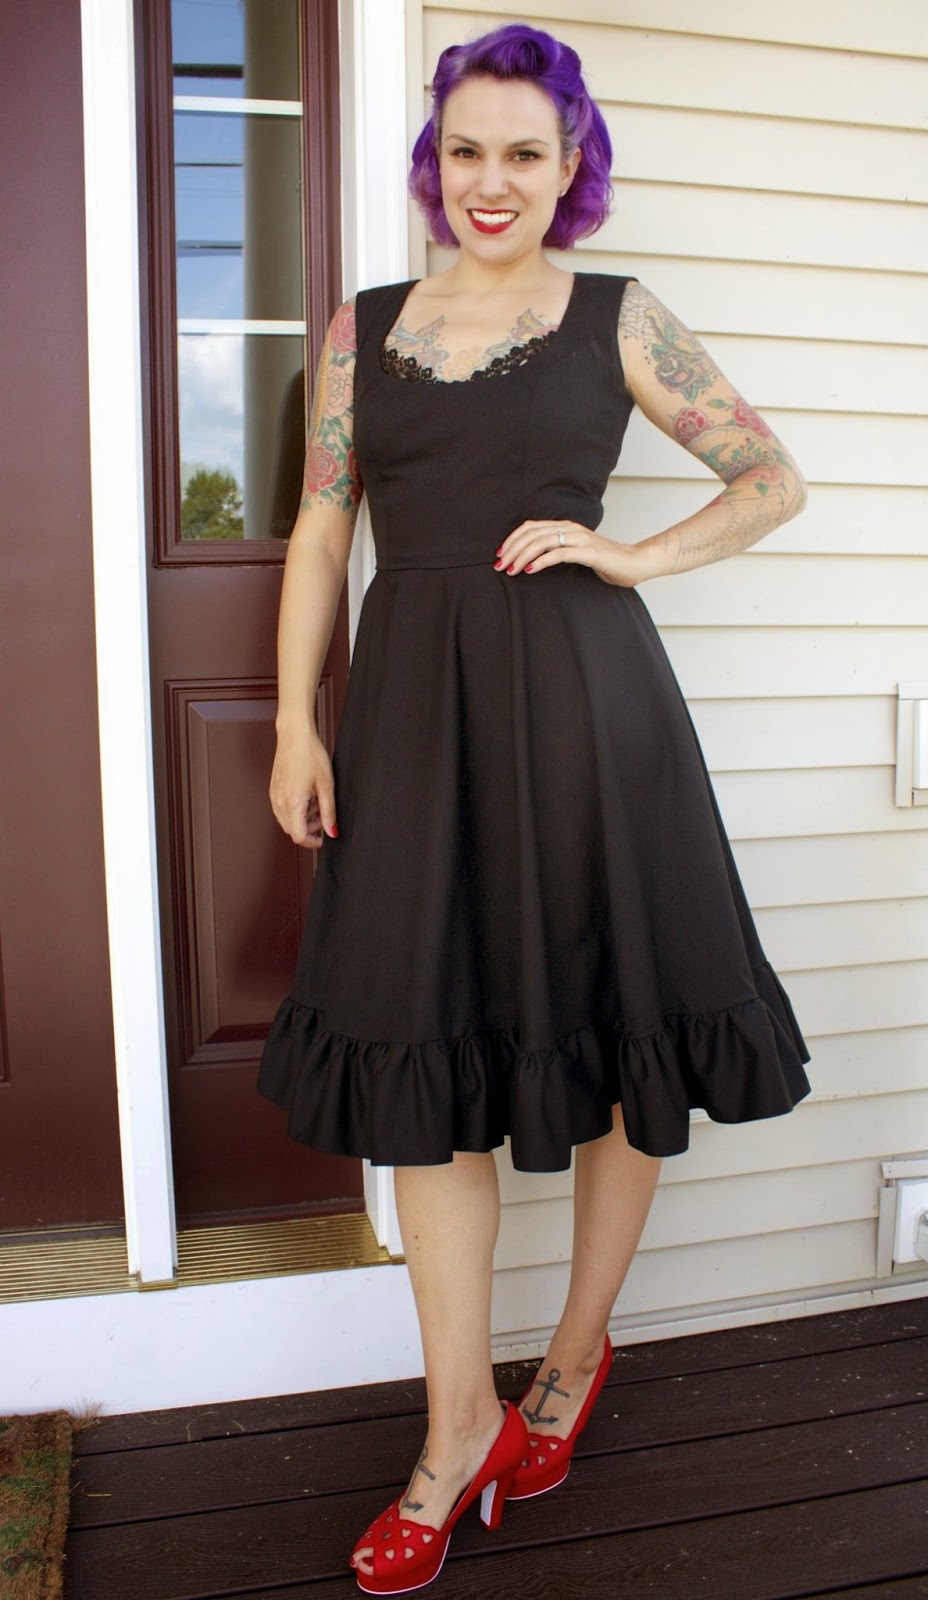 Gertie's New Blog for Better Sewing: A Black Lacy Dress for Summer